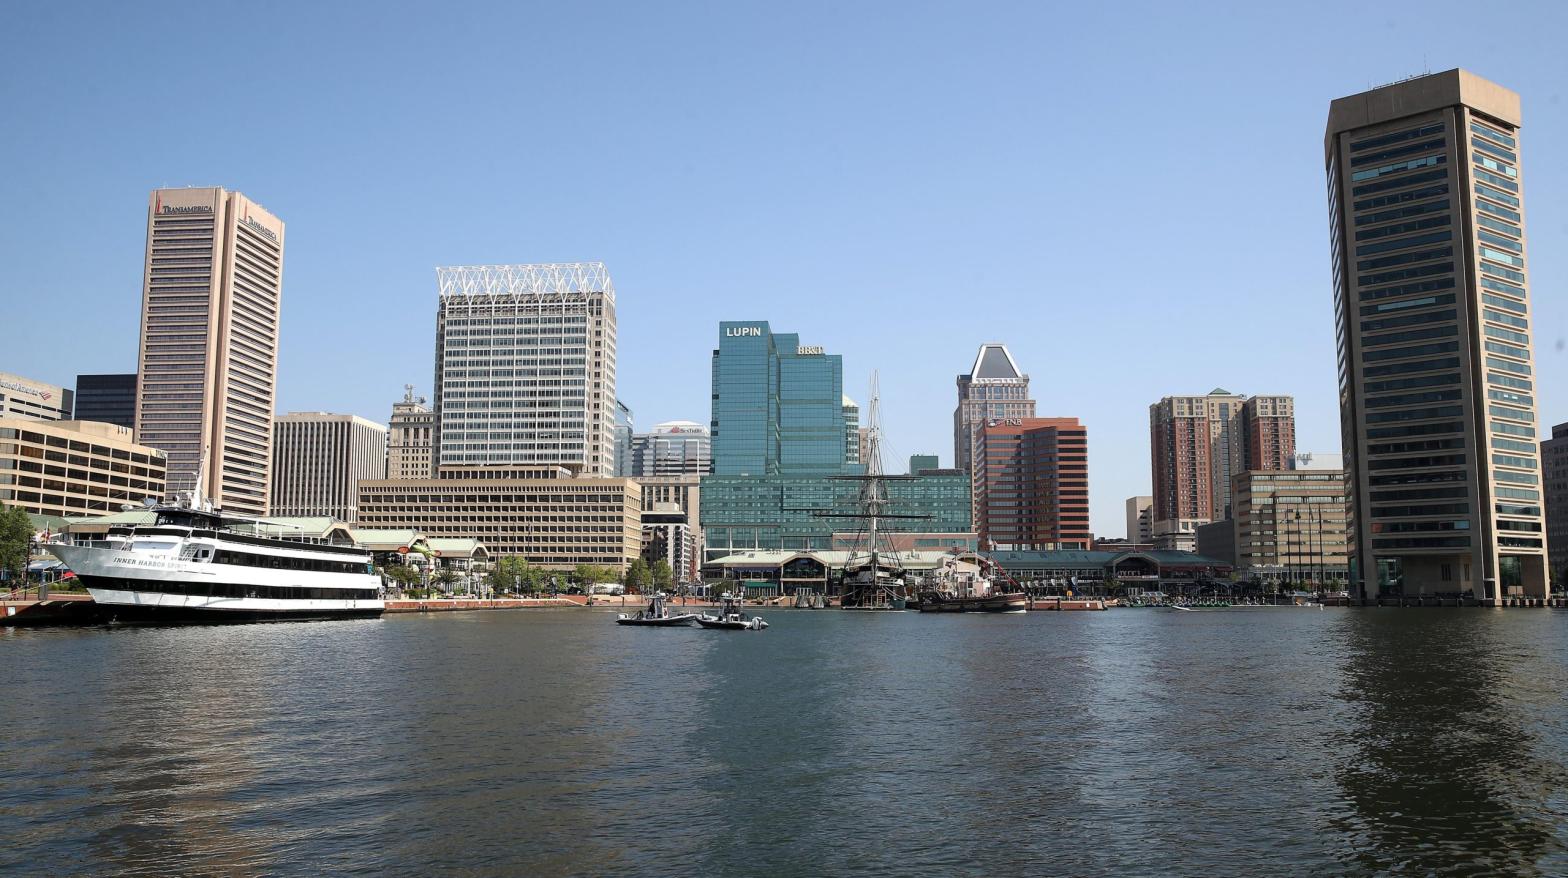 Baltimore's harbour on the Chesapeake Bay. (Photo: Mark Wilson, Getty Images)